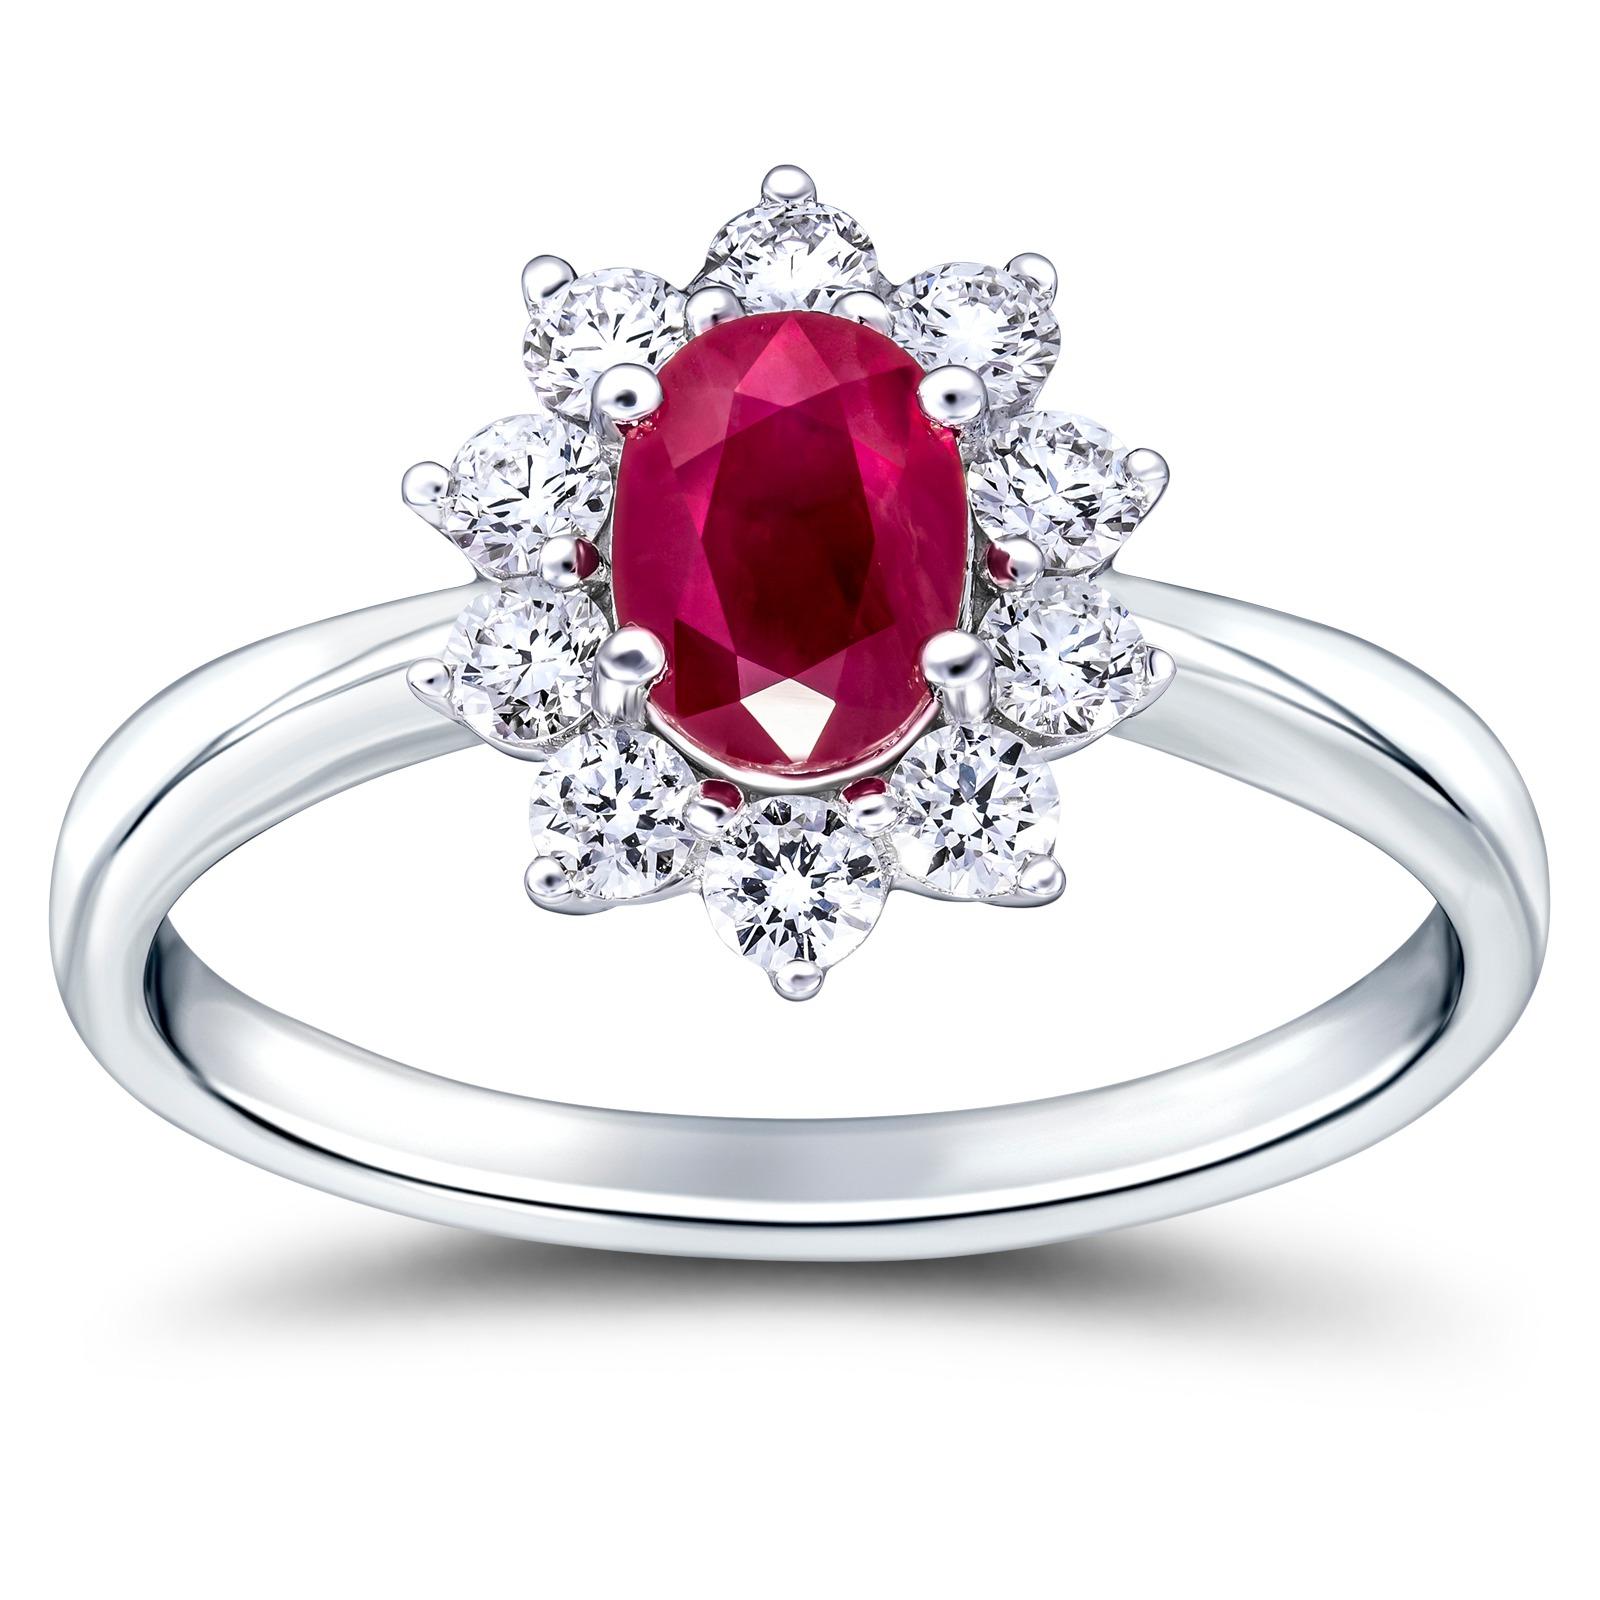 Elegant and striking 1.60 Carat total diamond and ruby Cluster Ring, The radiant oval ruby is surrounded by 10 white stunning white diamonds weighing a total of 0.60 carat color G/H clarity SI, the ruby is 1.00 carat in weight 7x5 mm. The ring is